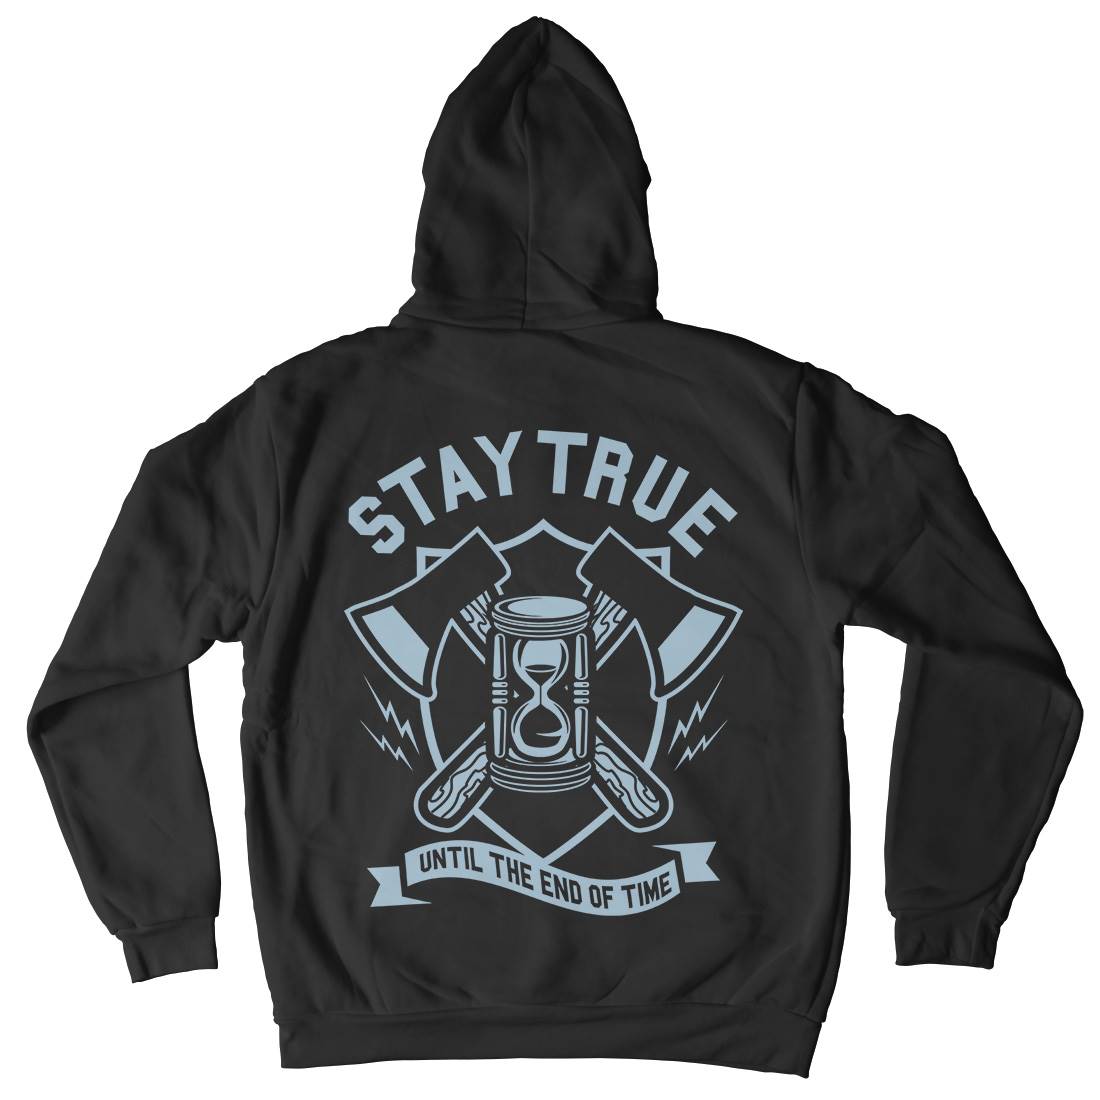 Stay True Mens Hoodie With Pocket Quotes A285